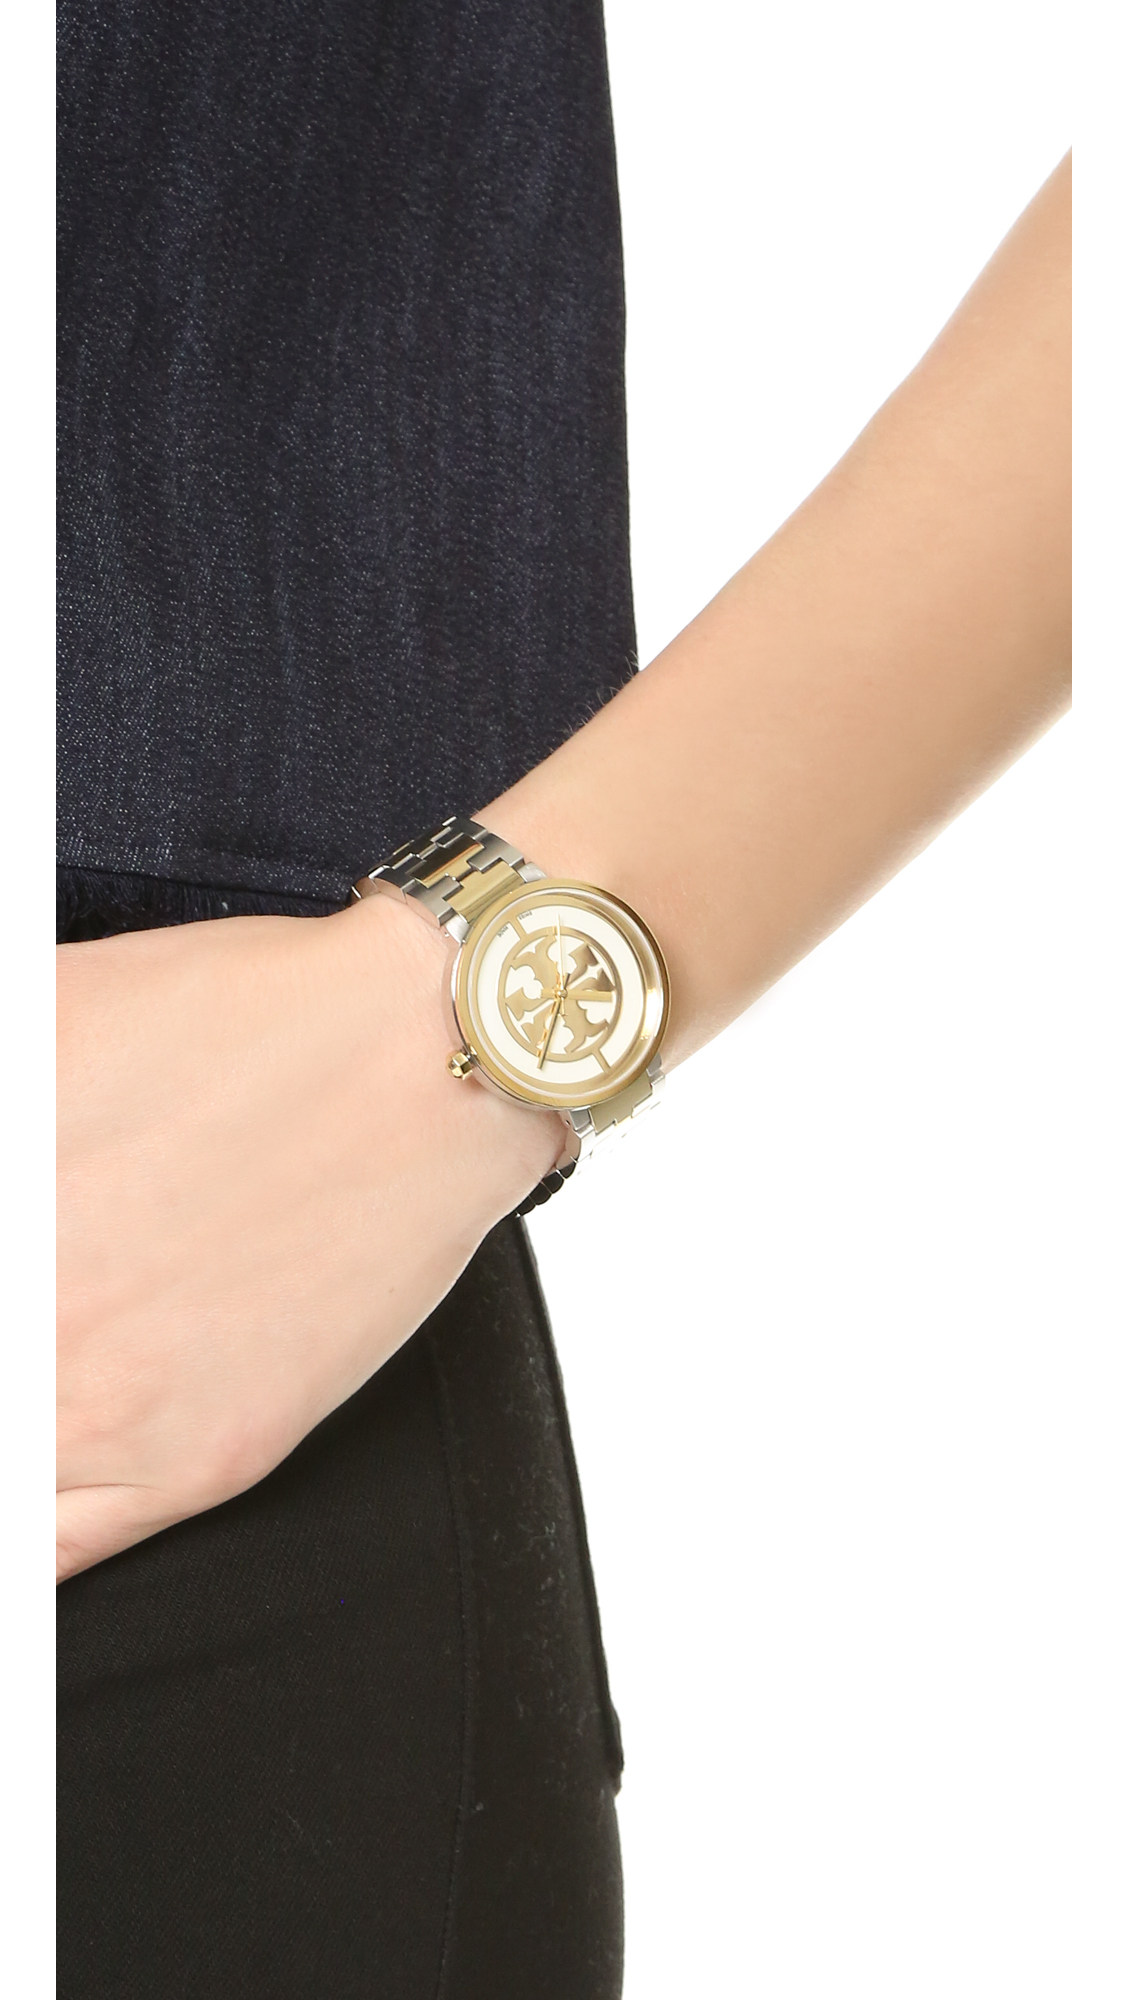 Watches Tory Burch